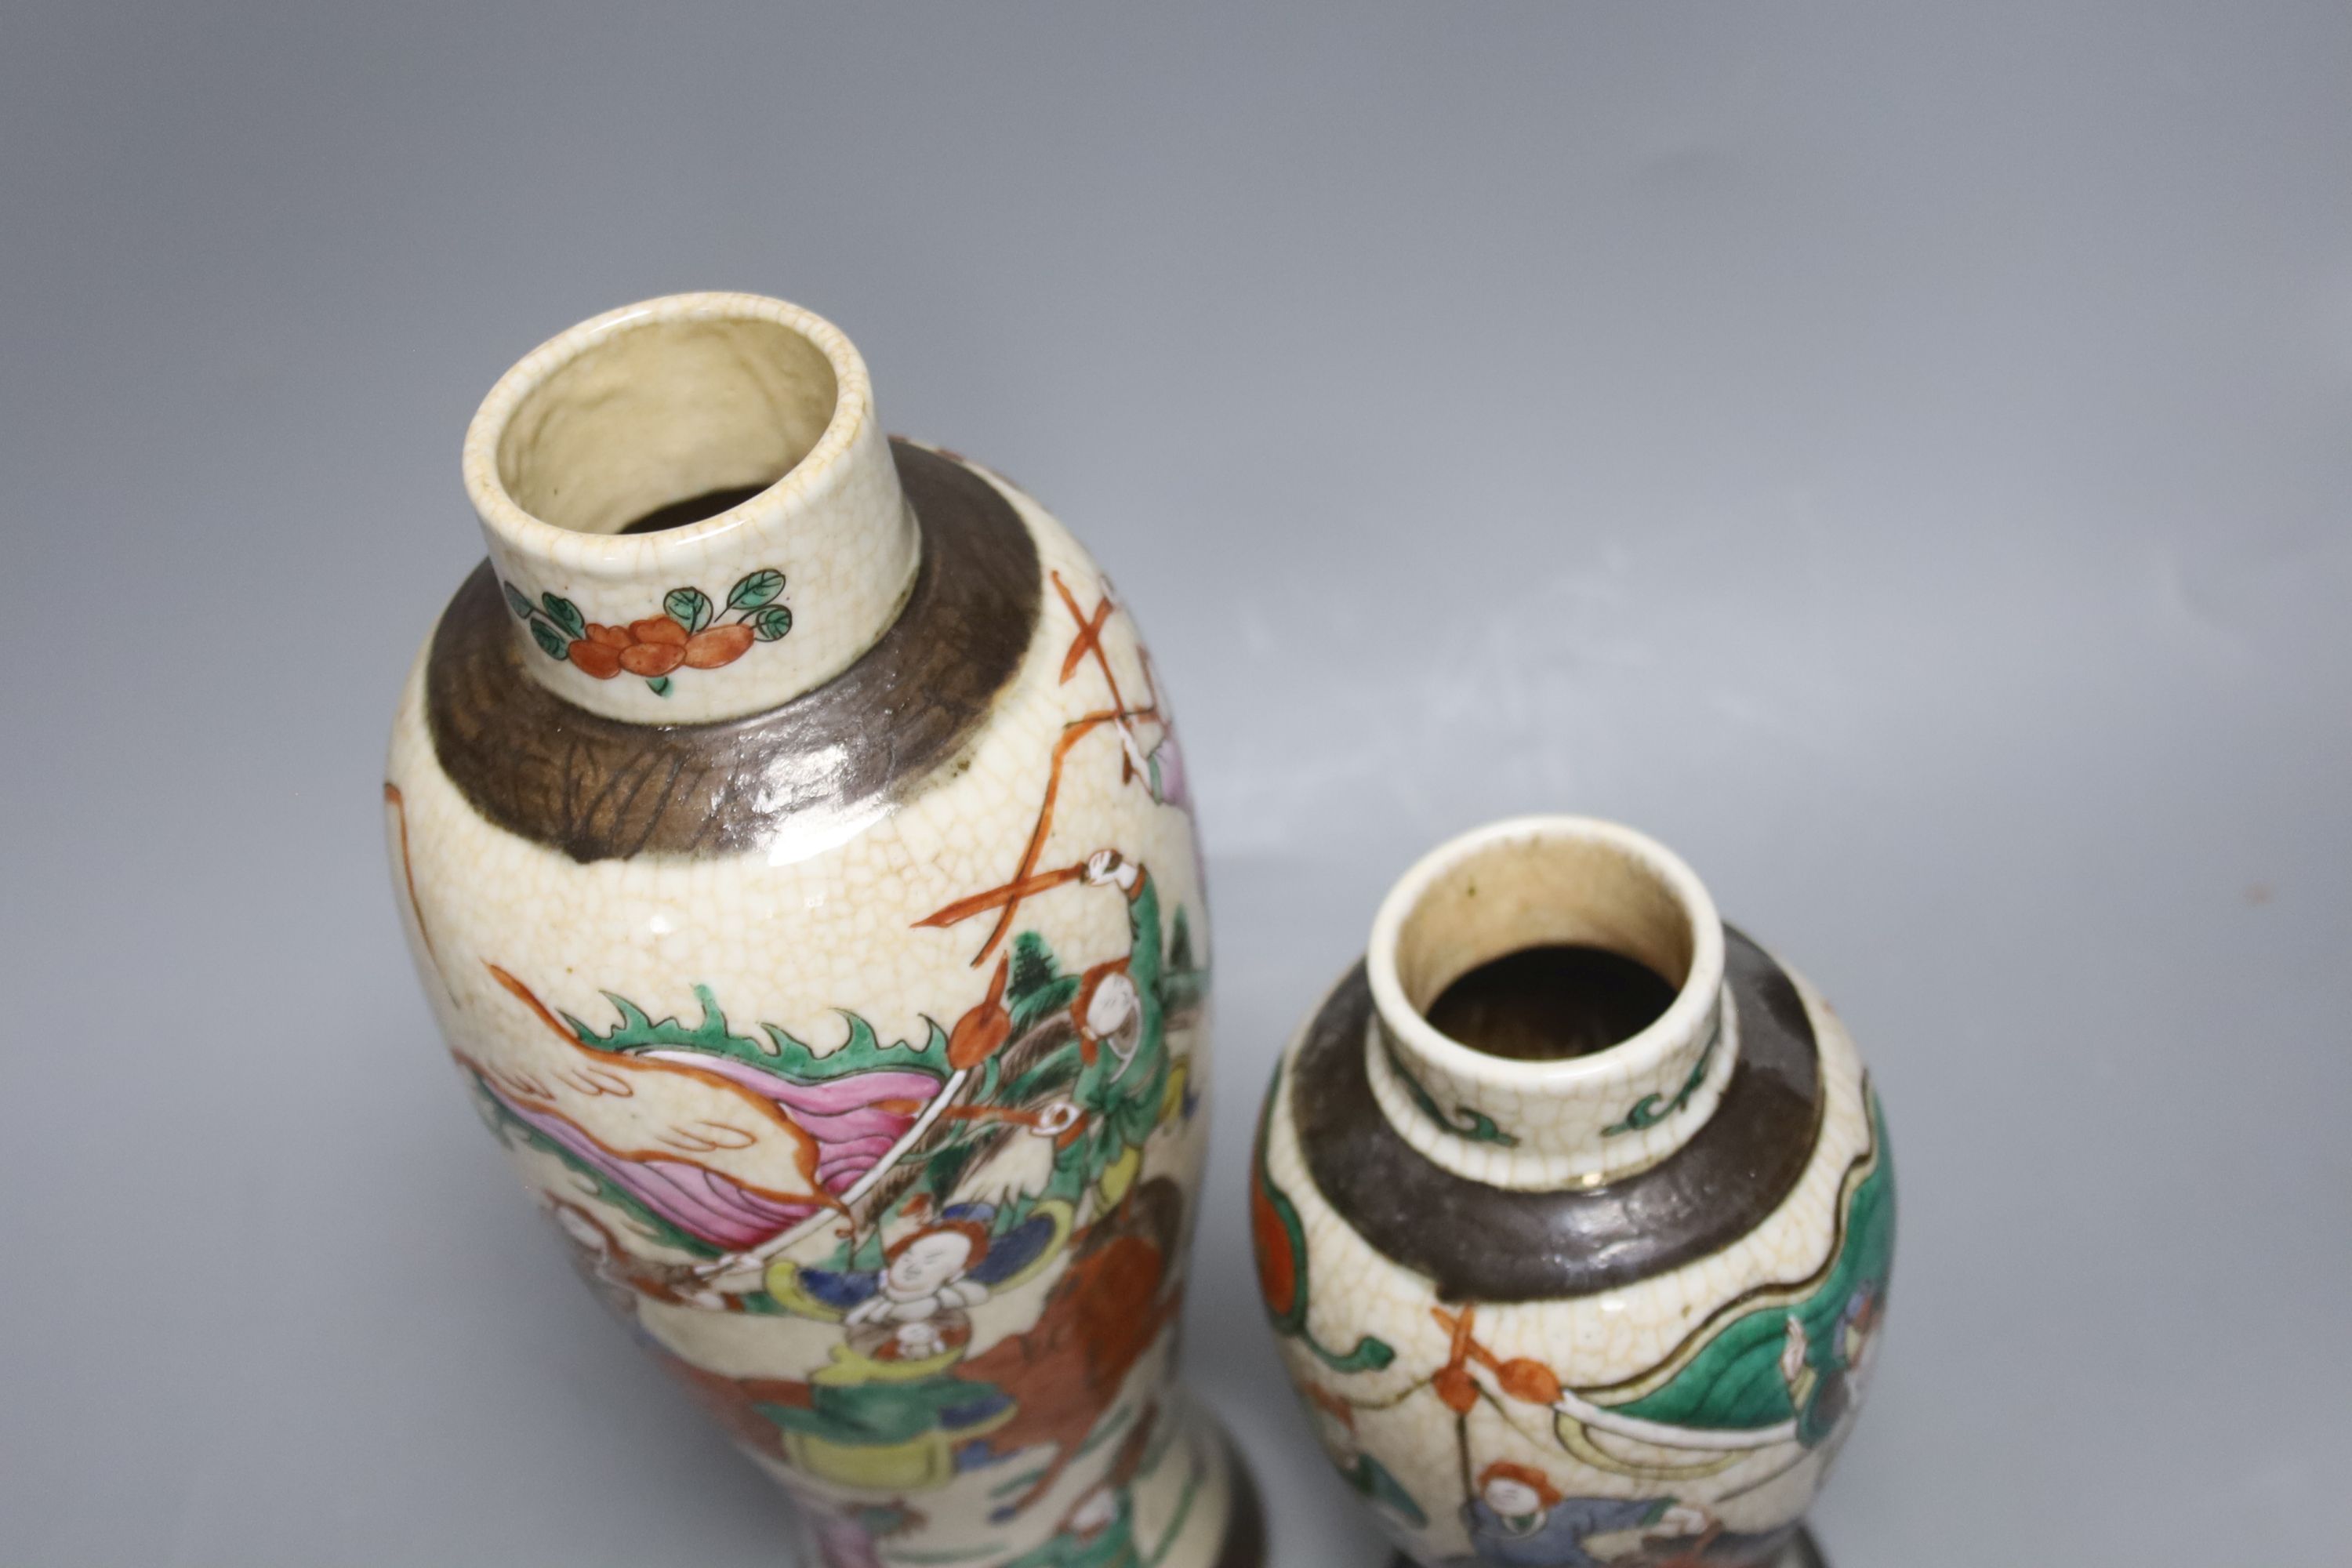 Three early 20th century Chinese crackle glaze vases, two with covers, tallest 33.5cm - Image 4 of 5